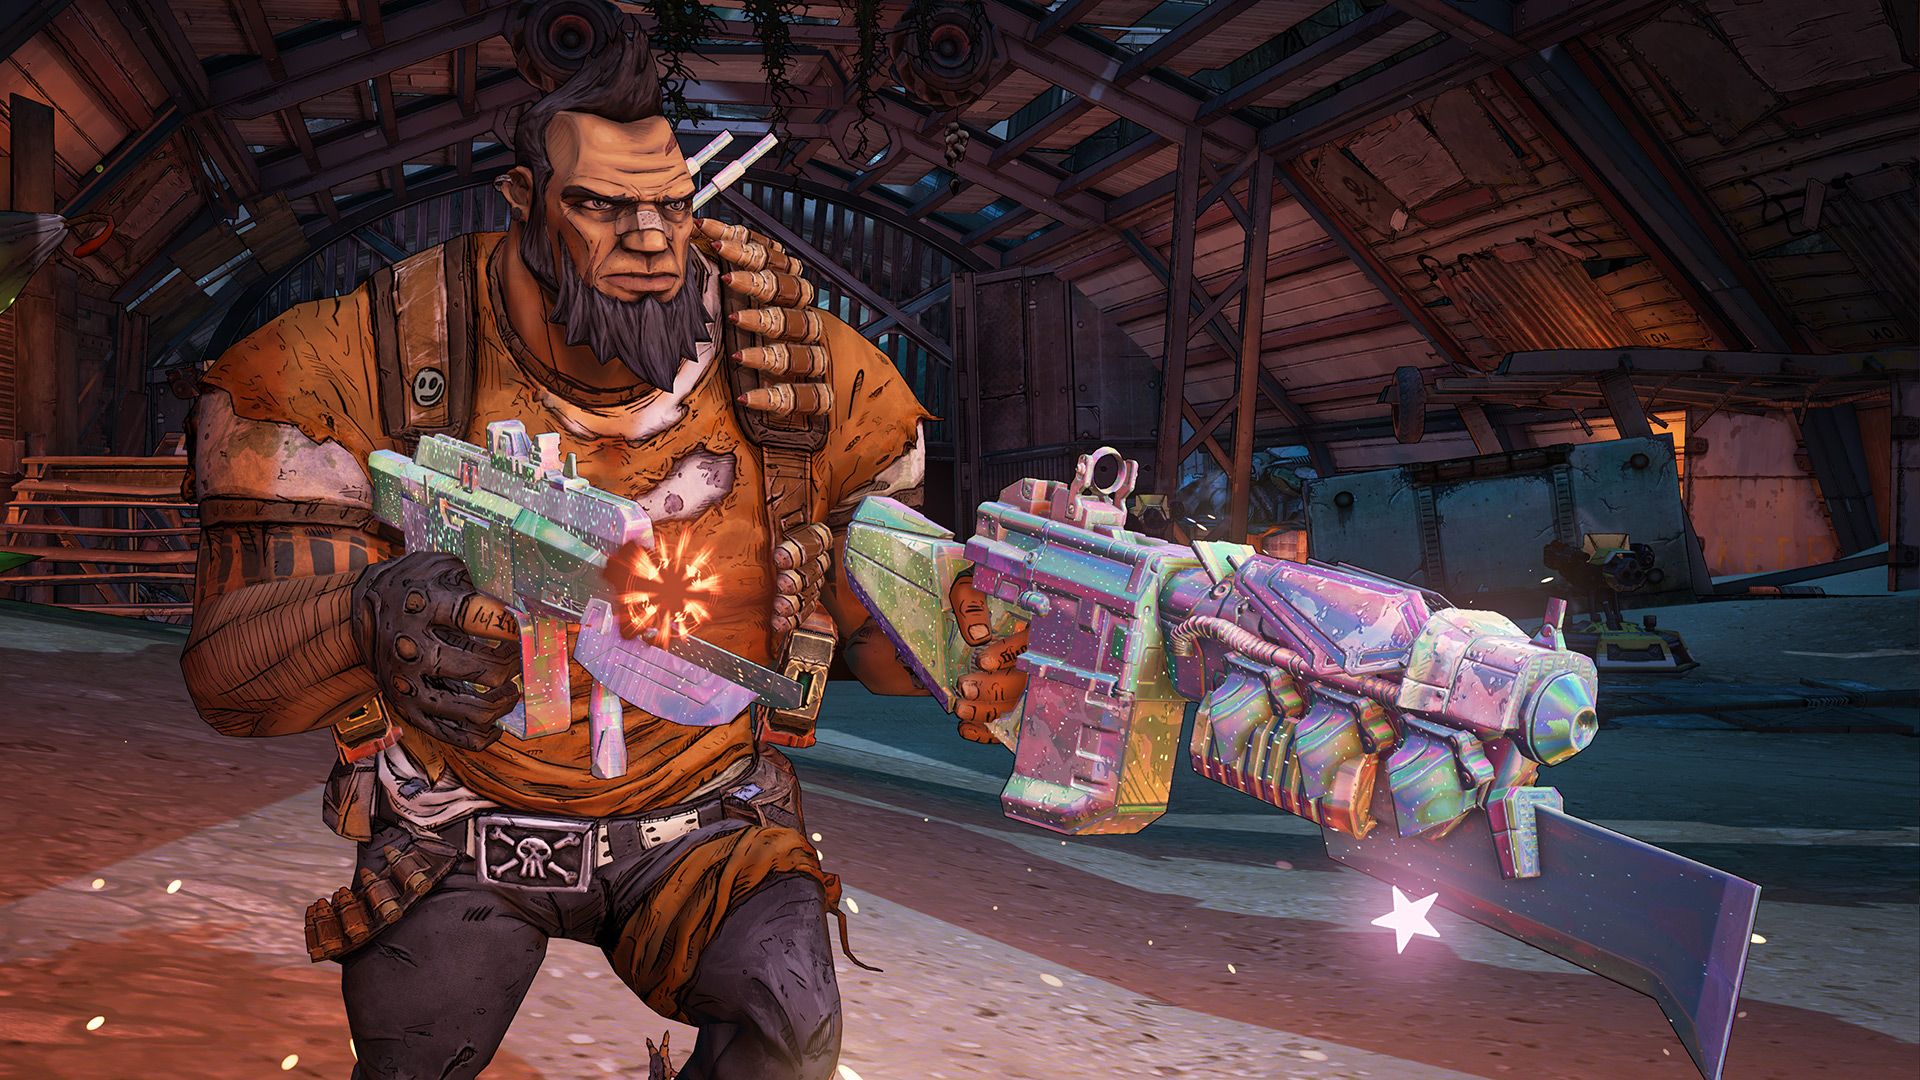 borderlands-2-commander-lilith-and-the-fight-for-sanctuary-dlc-out-on-june-10th